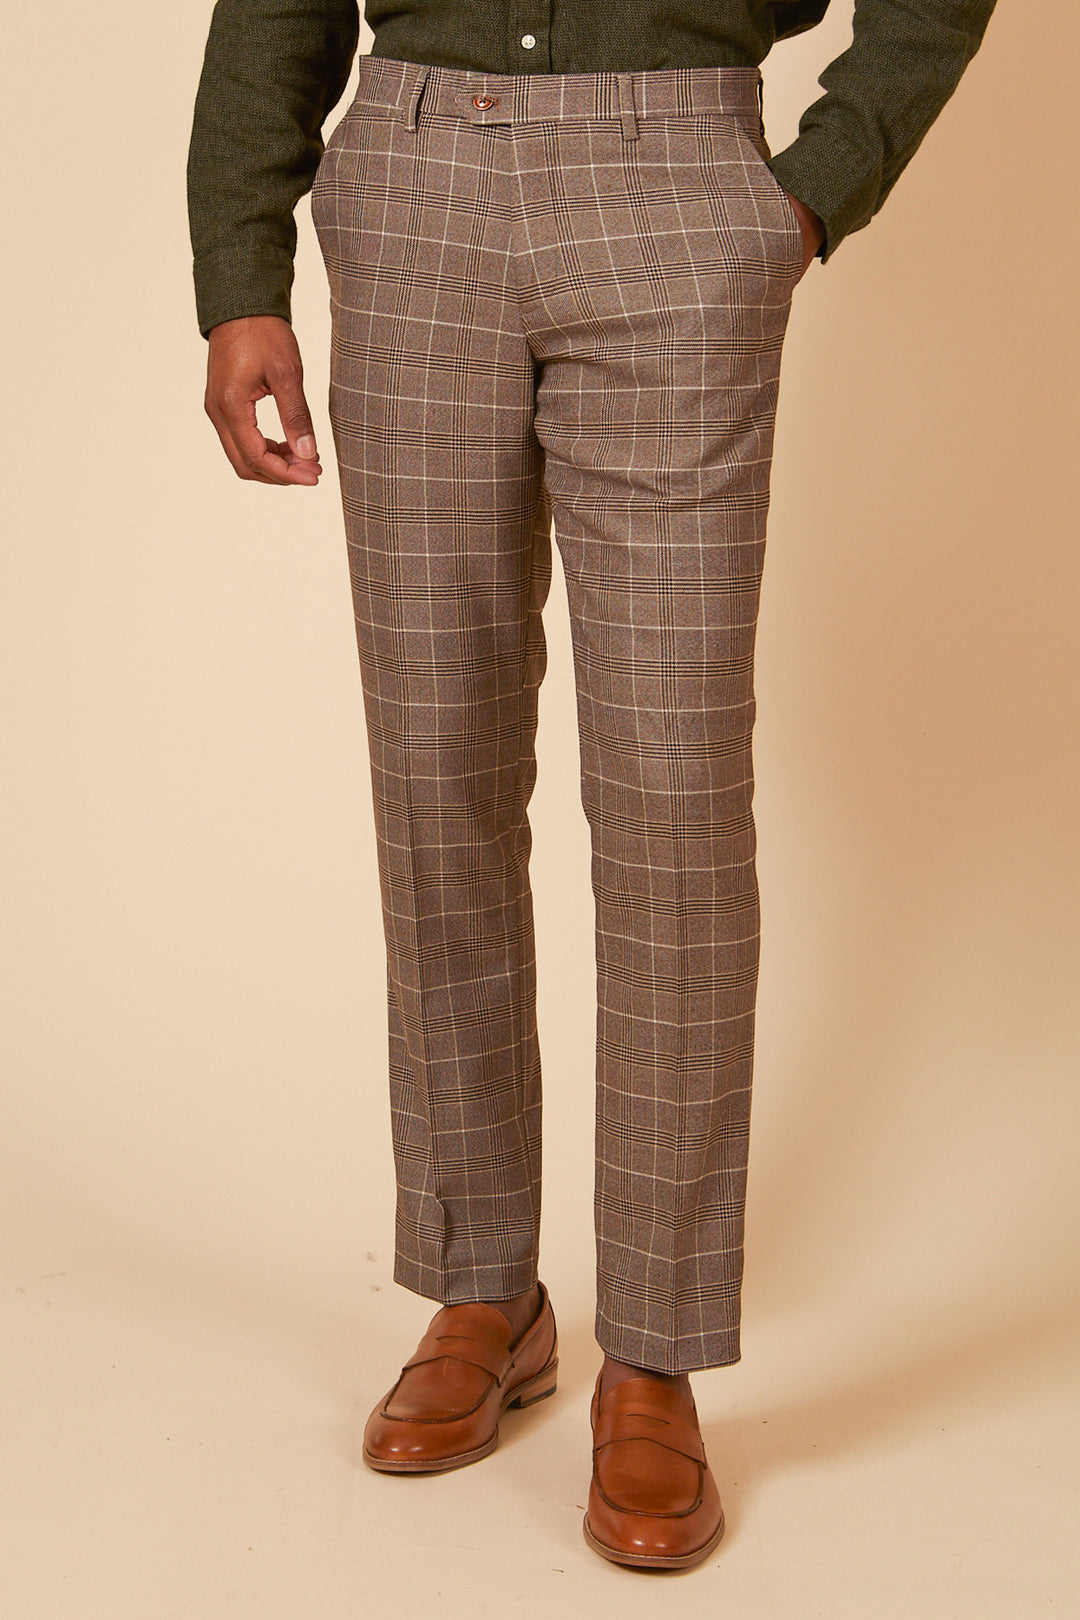 RAY - Tan Check Two Piece Suit